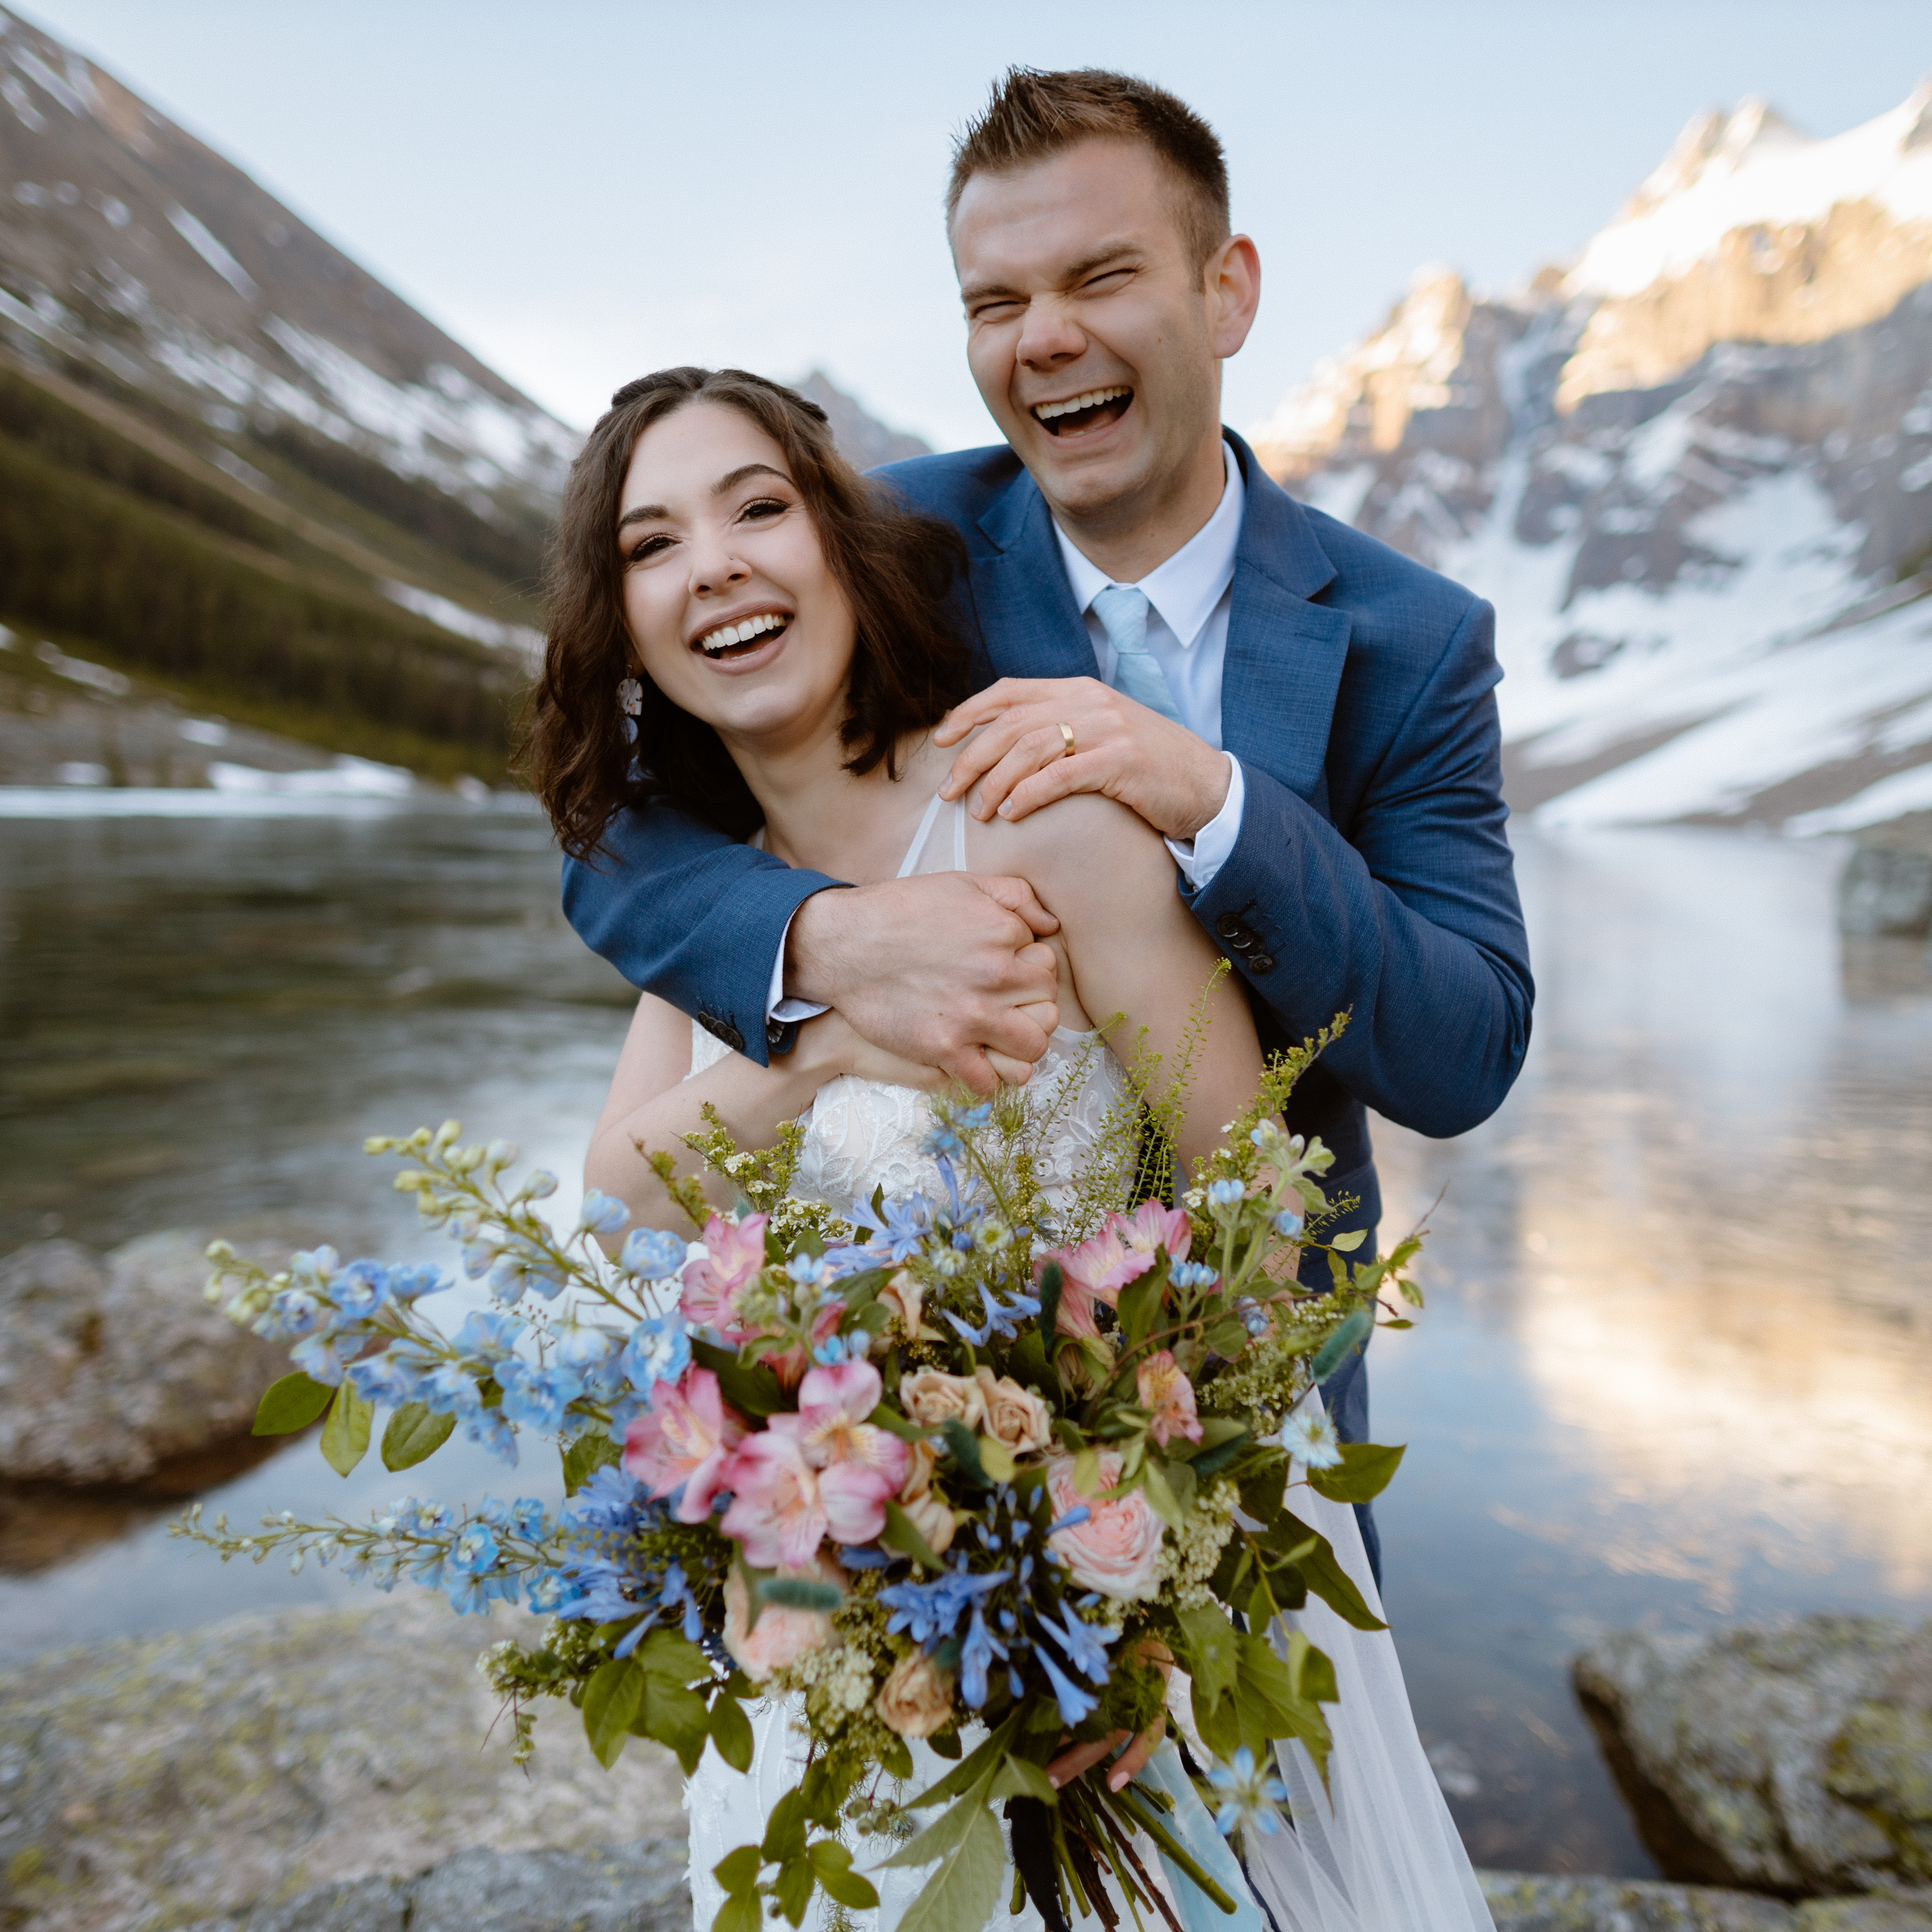 Why you should hire an elopement videographer